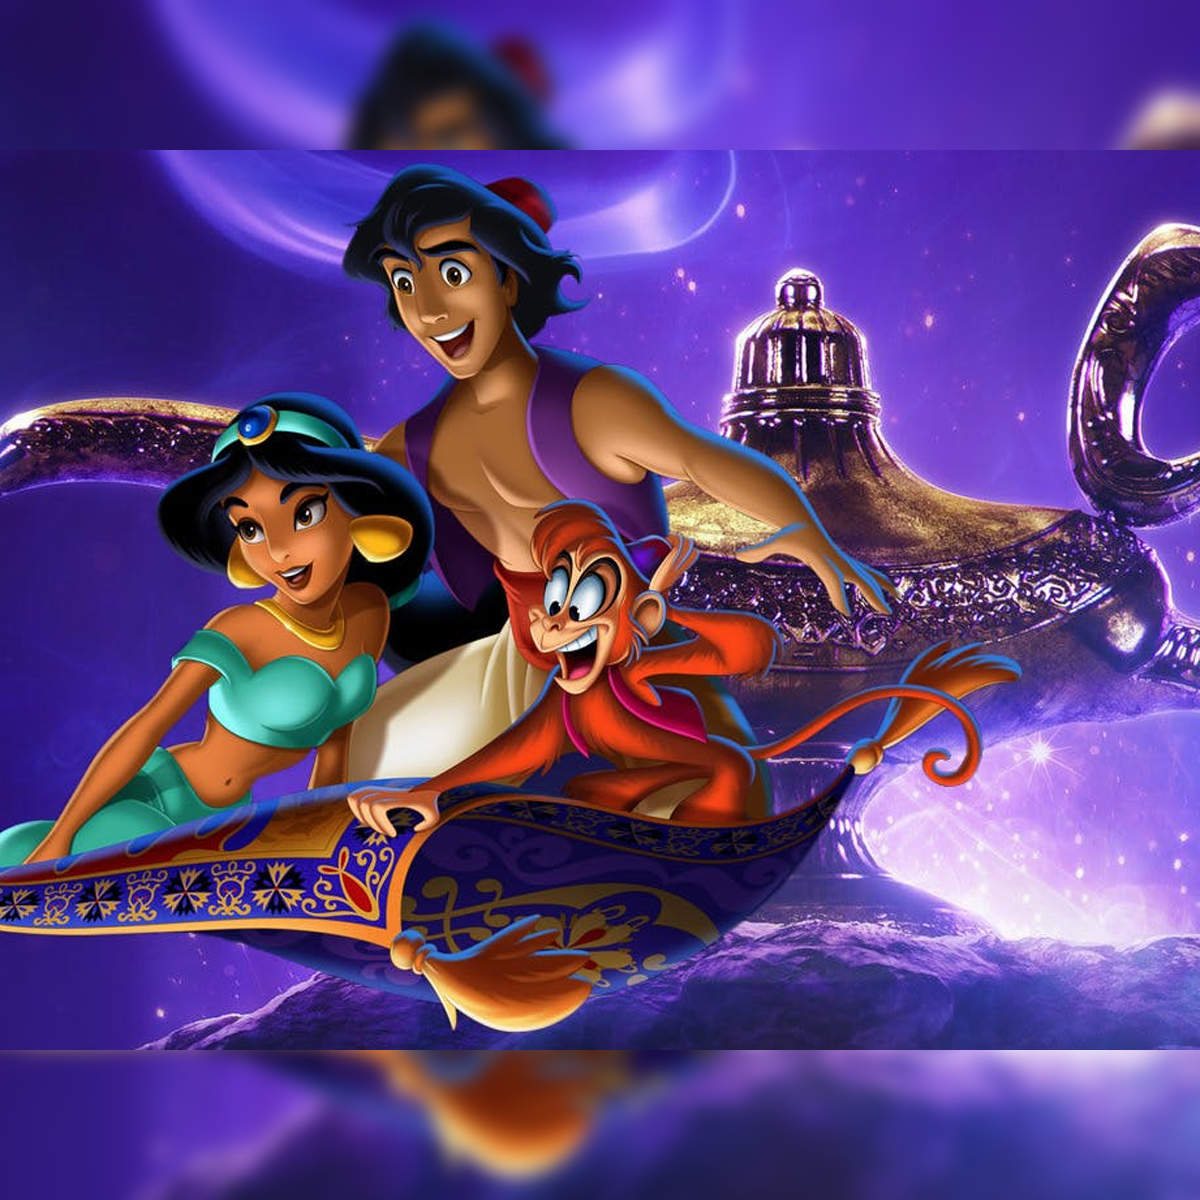 Aladdin 2 Release Date Rumors: Is It Coming Out?